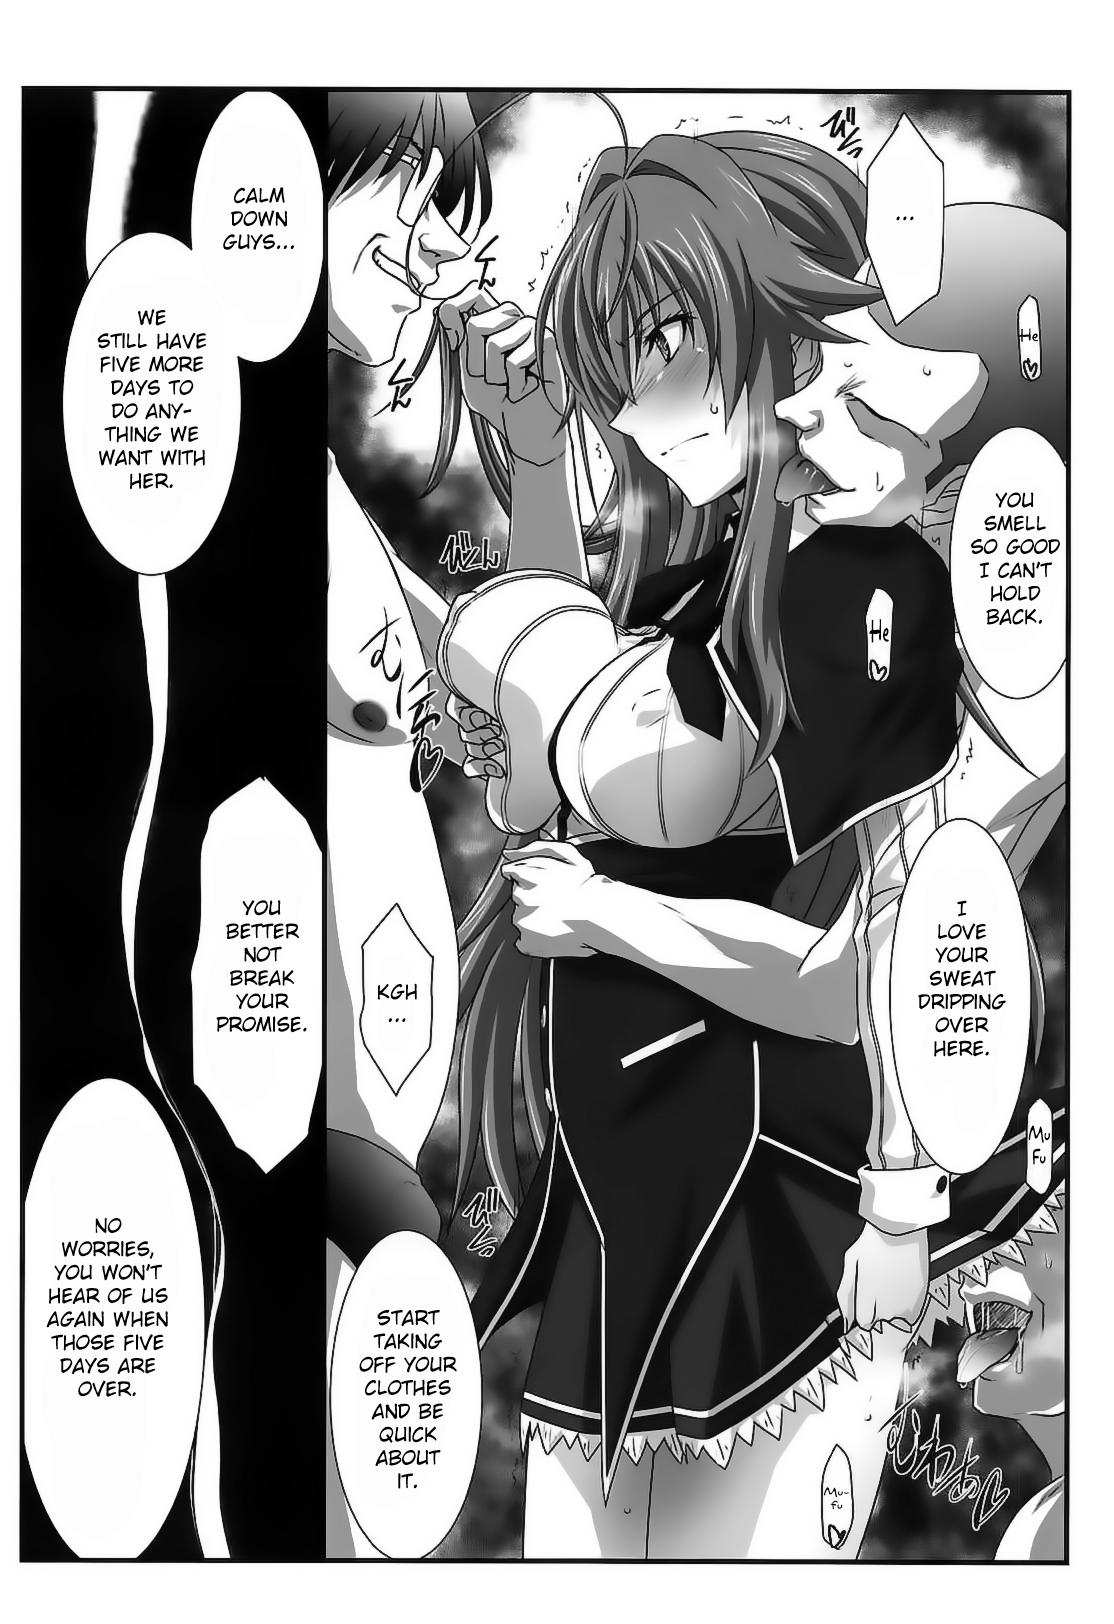 Hole SPIRAL ZONE DxD II - Highschool dxd Gay Pov - Page 5